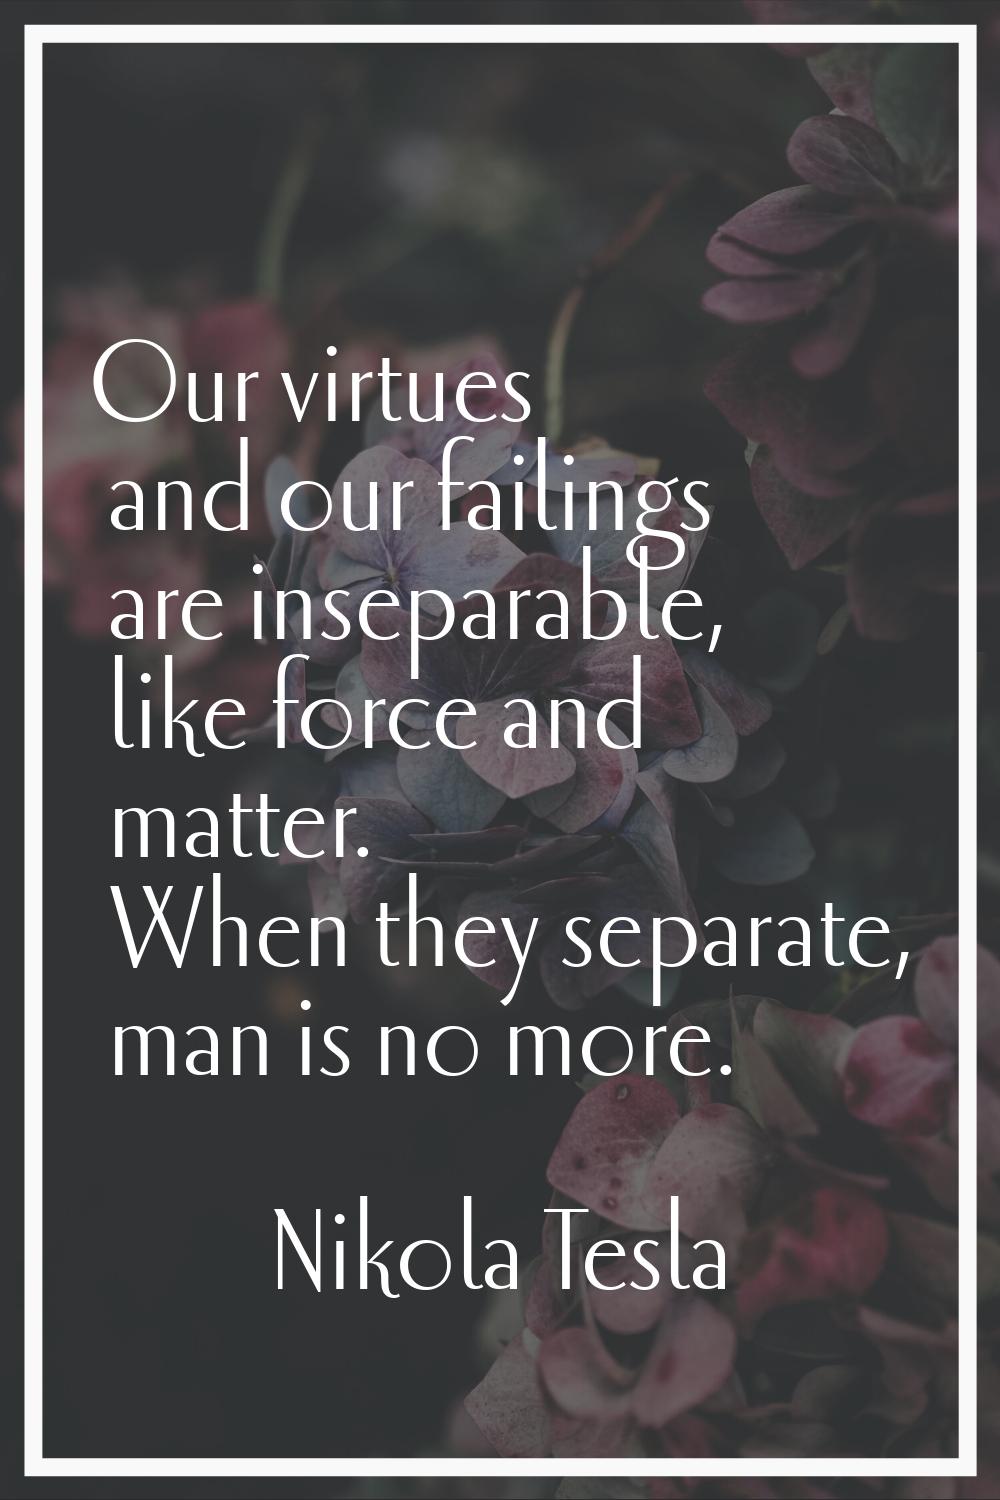 Our virtues and our failings are inseparable, like force and matter. When they separate, man is no 